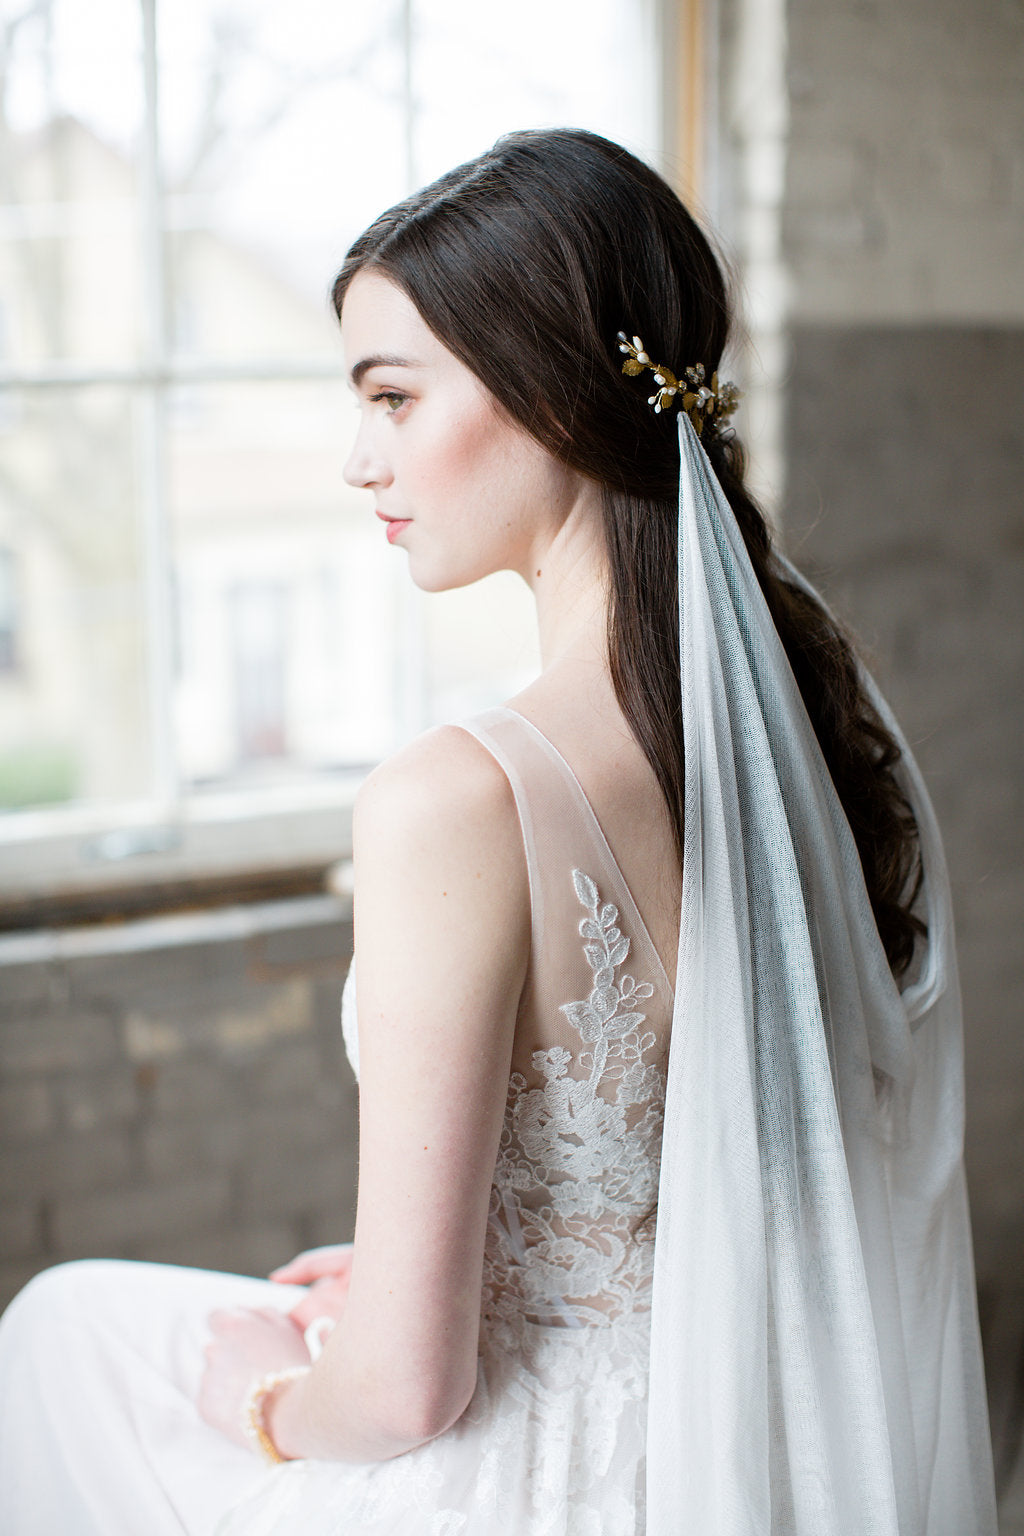 GALAXY  Bridal Veil with Sparkle – Noon on the Moon